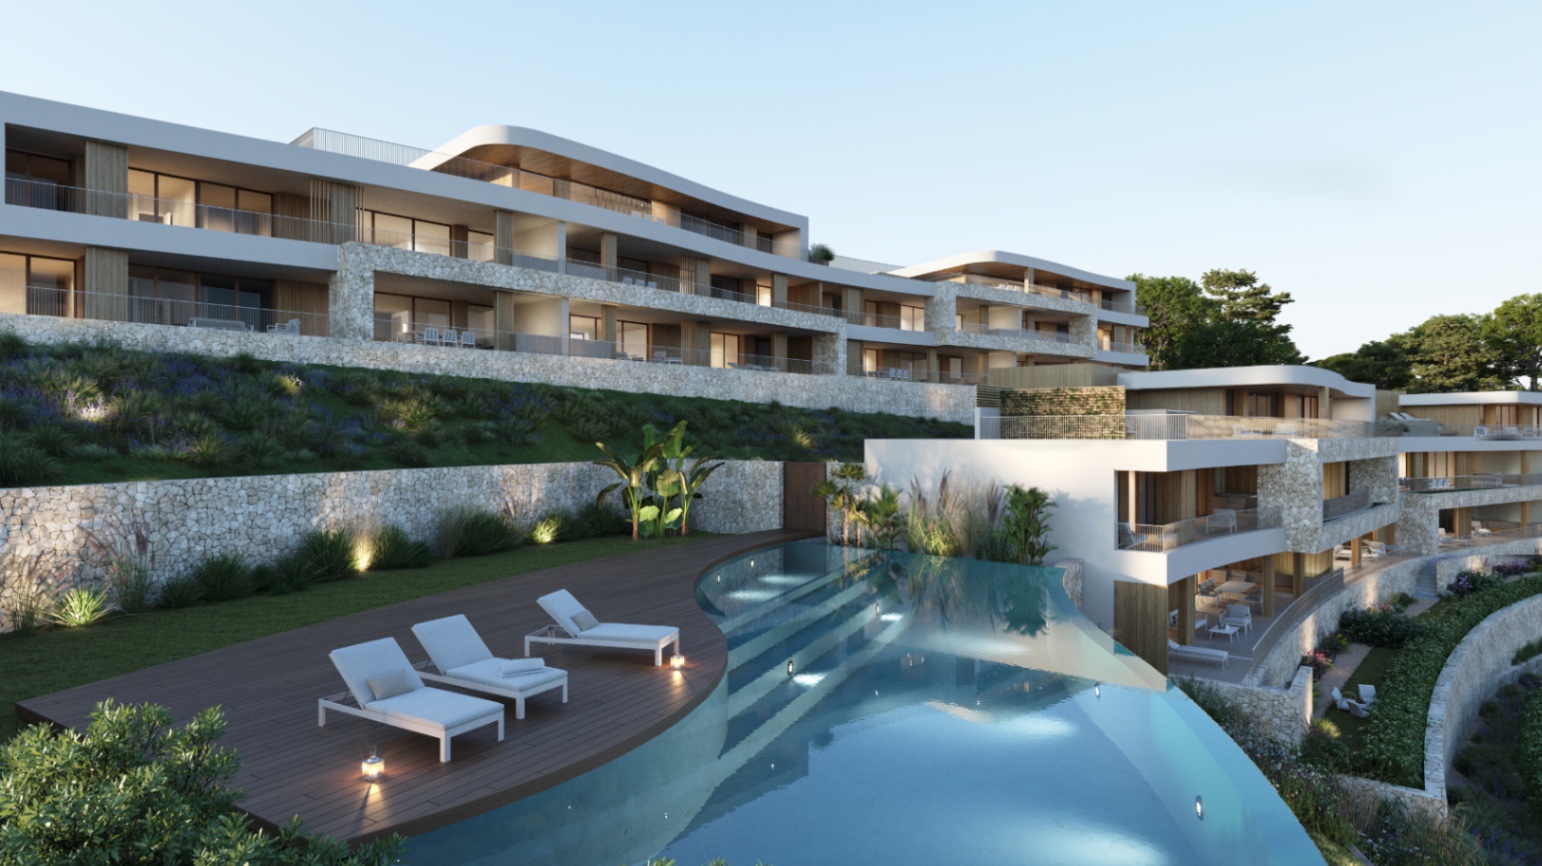 Luxury & Exclusive flats for sale in Benicassim